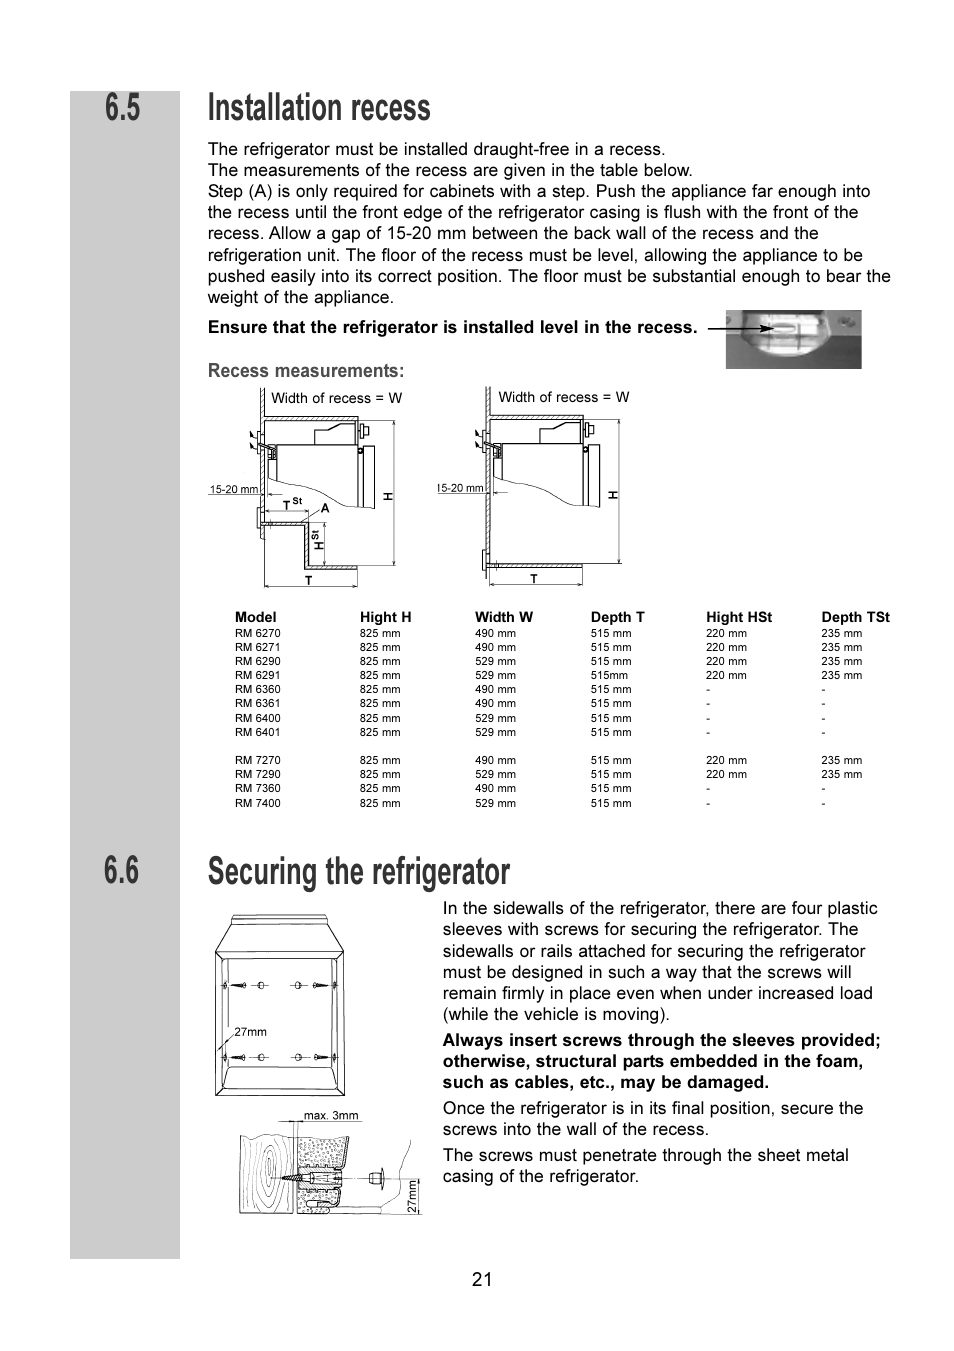 Installation recess, Securing the refrigerator, Recess measurements | Dometic  RM 6270(L) User Manual | Page 21 / 28 | Original mode